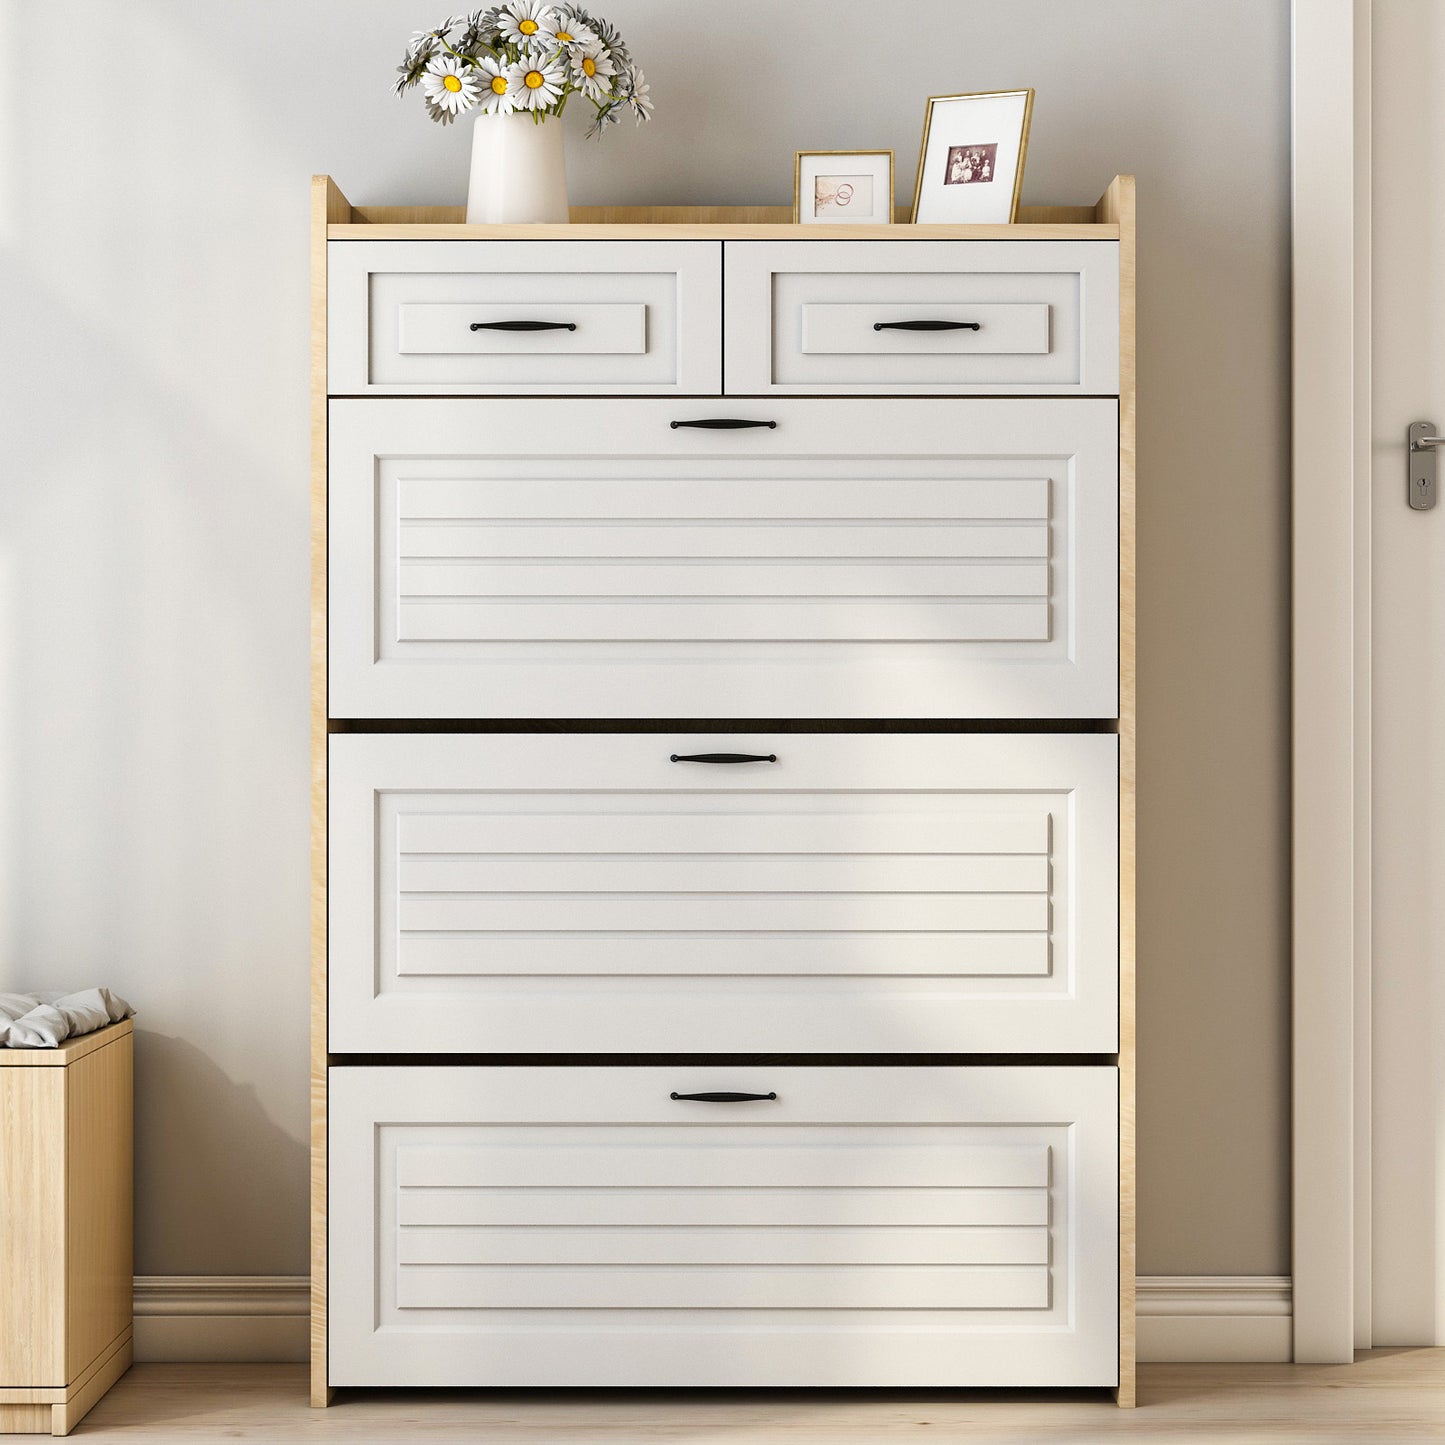 White +Oak Color shoe cabinet with 3 doors 2 drawers,PVC door with shape ,large space for storage